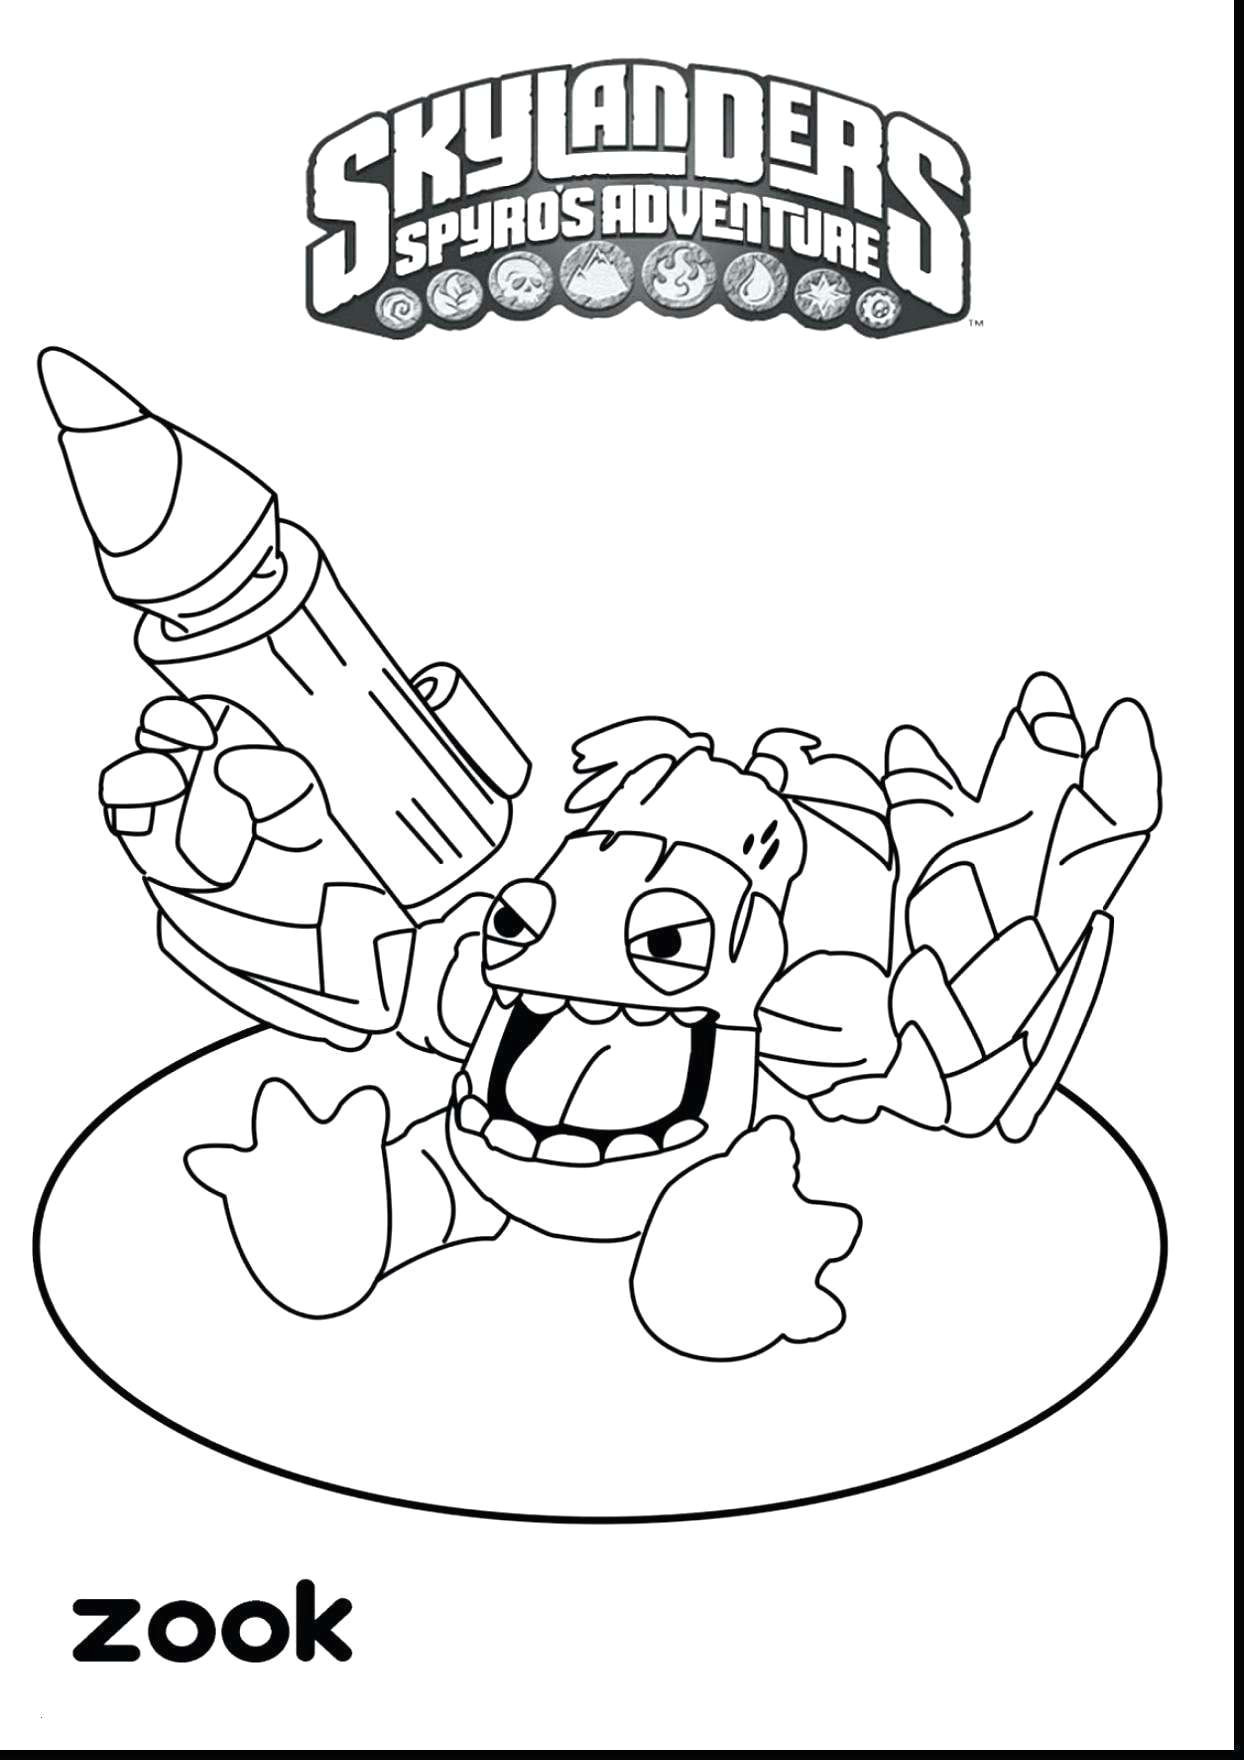 25 drawing inspiration generator new 35 coloring pages for little boys free